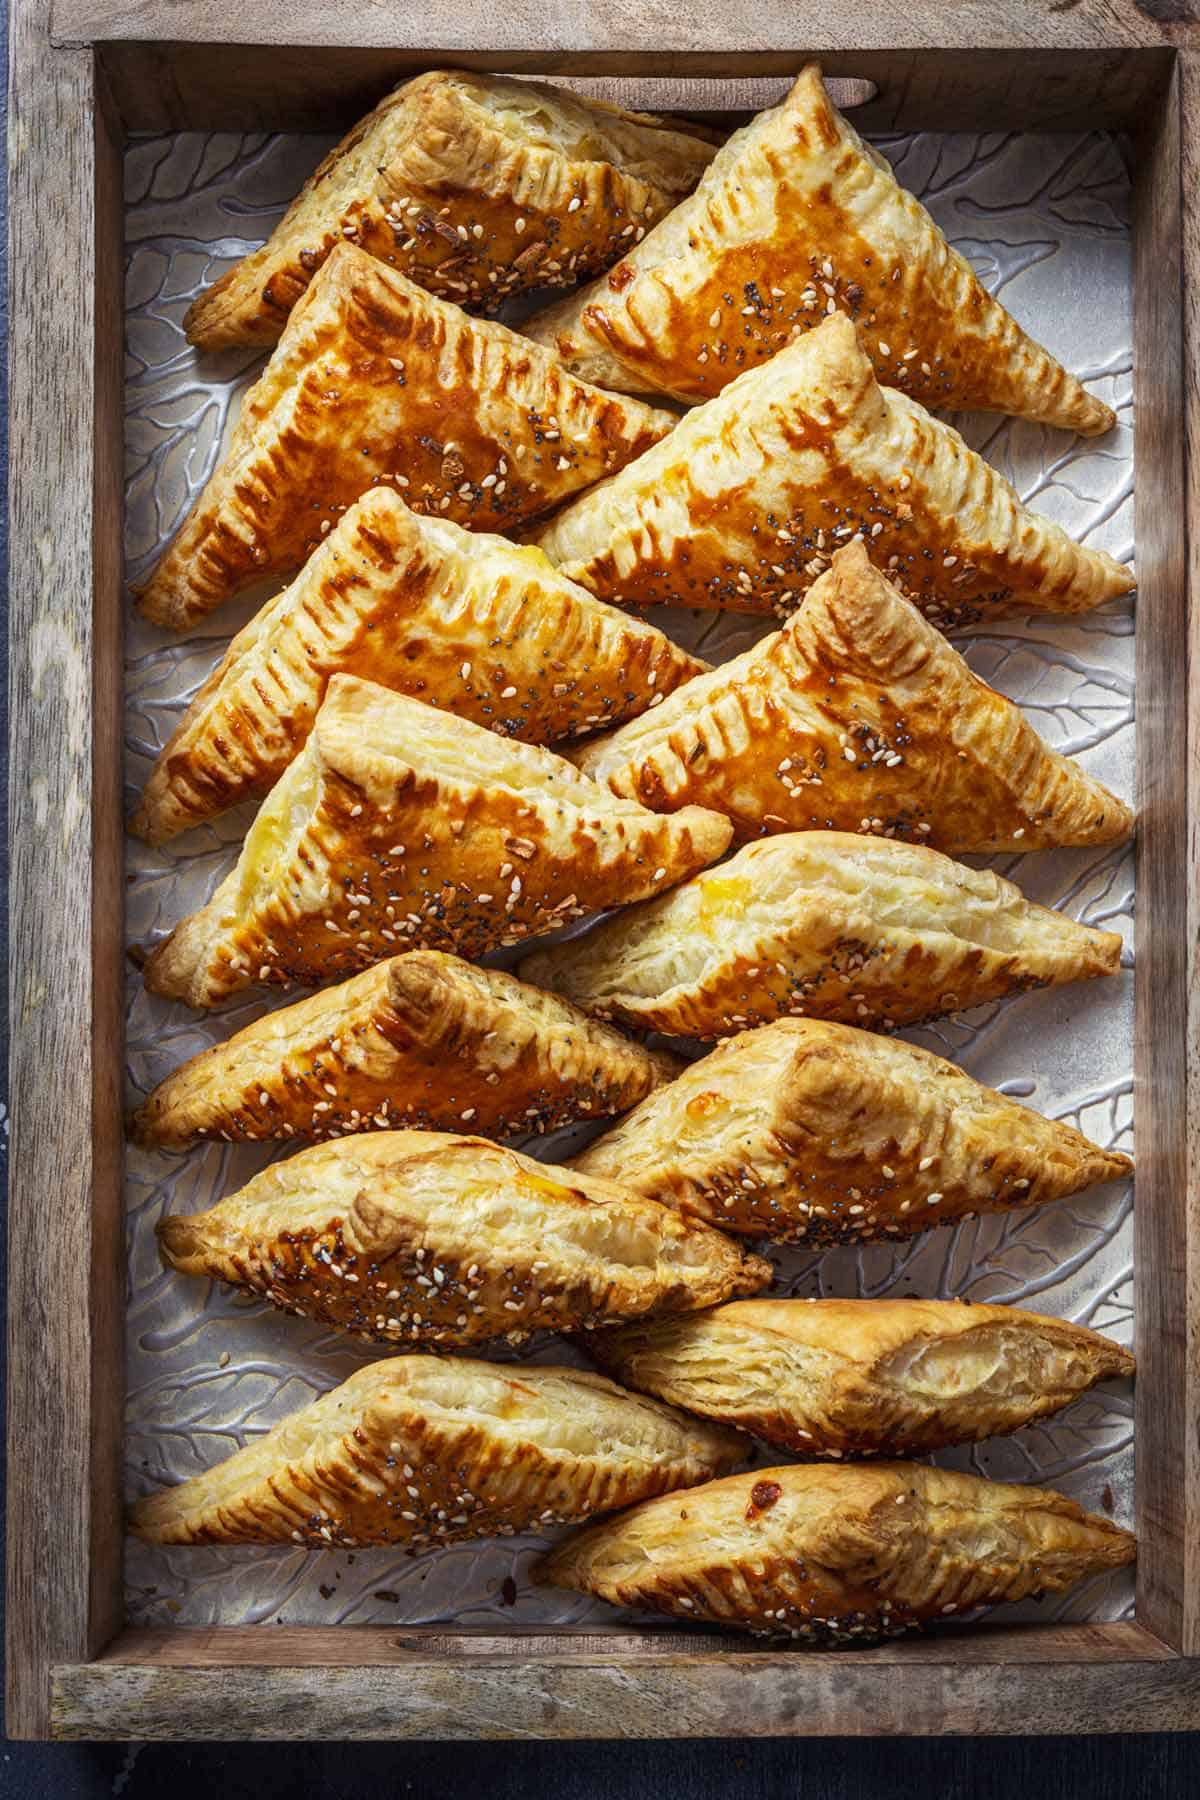 Baked borekas triangles lined up in a wooden tray.